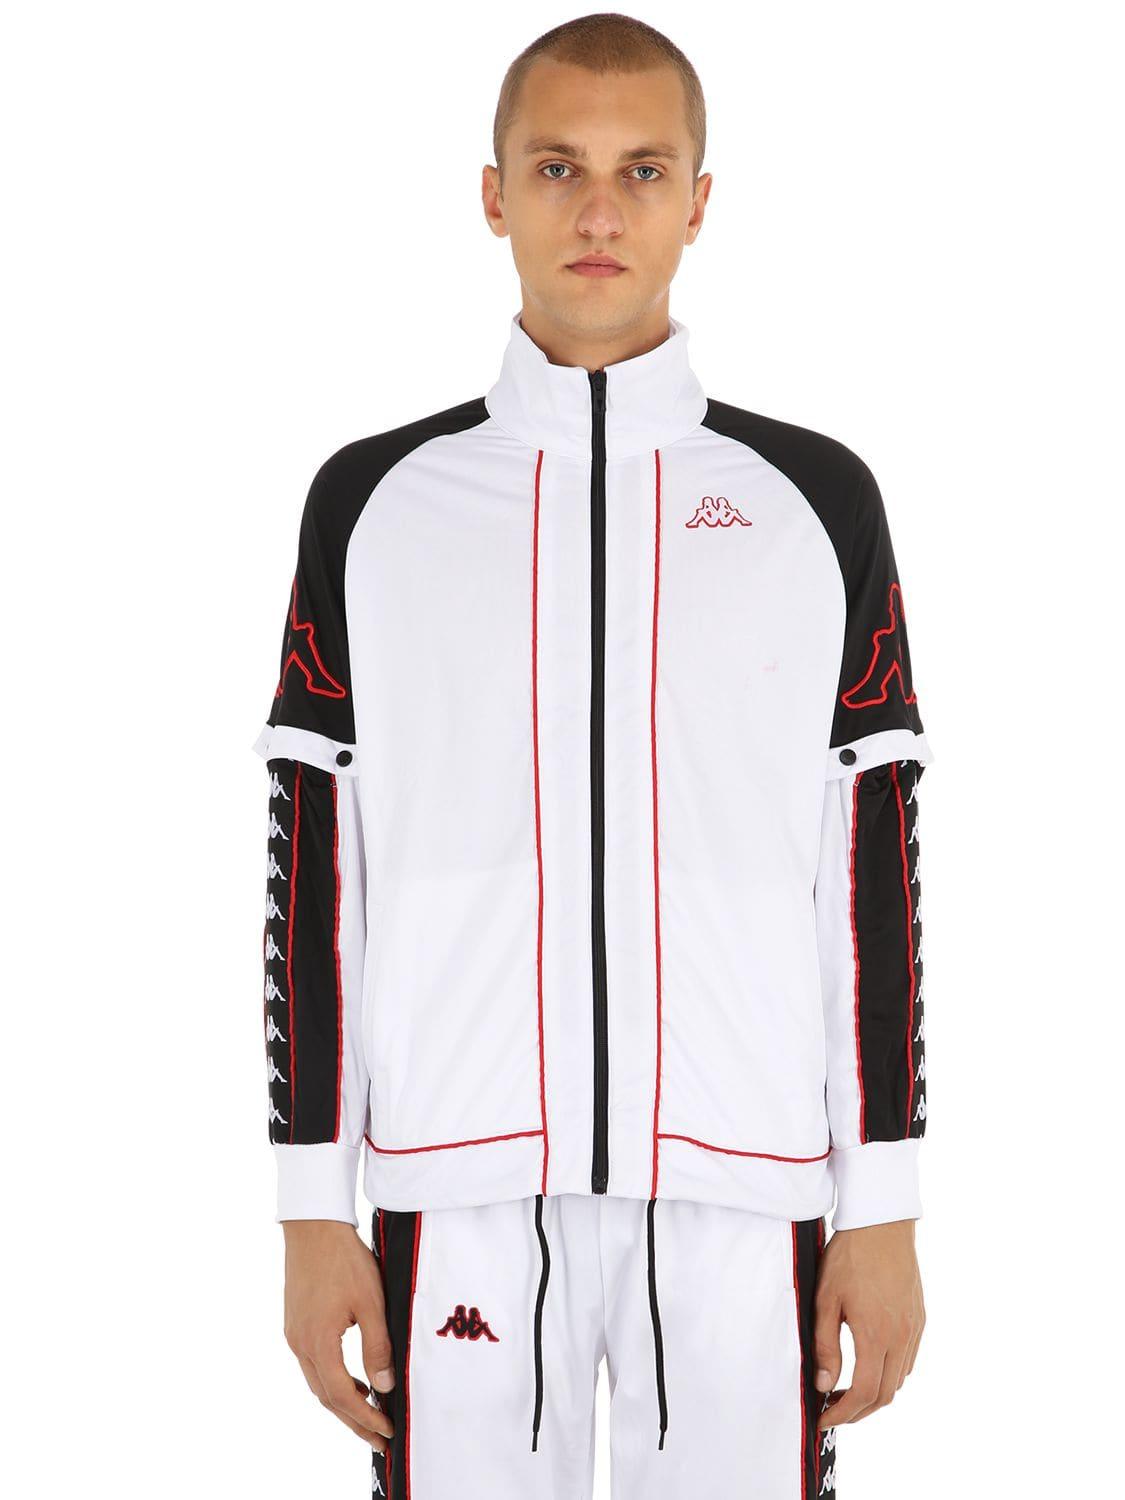 Kappa Track Jacket W/ Detachable Sleeves in White for Men - Lyst